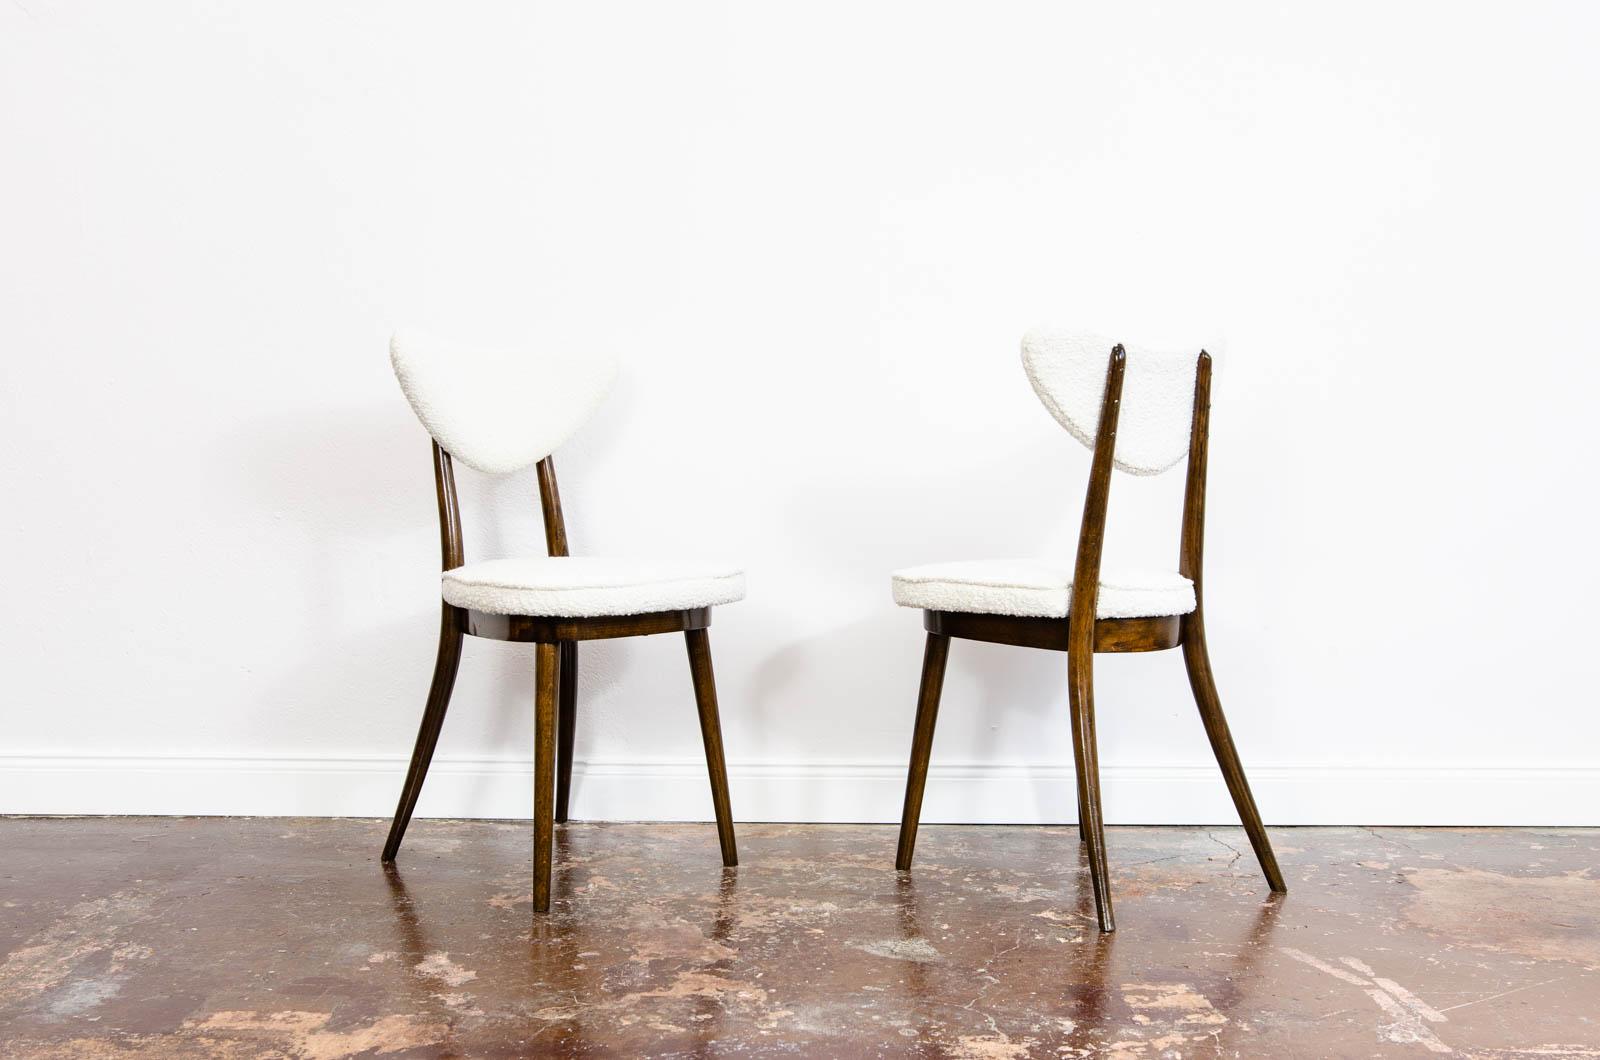 Fabric Set of 4 Mid-Century Bentwood Chairs in White Bouclé by H & J Kurmanowicz, 1950s